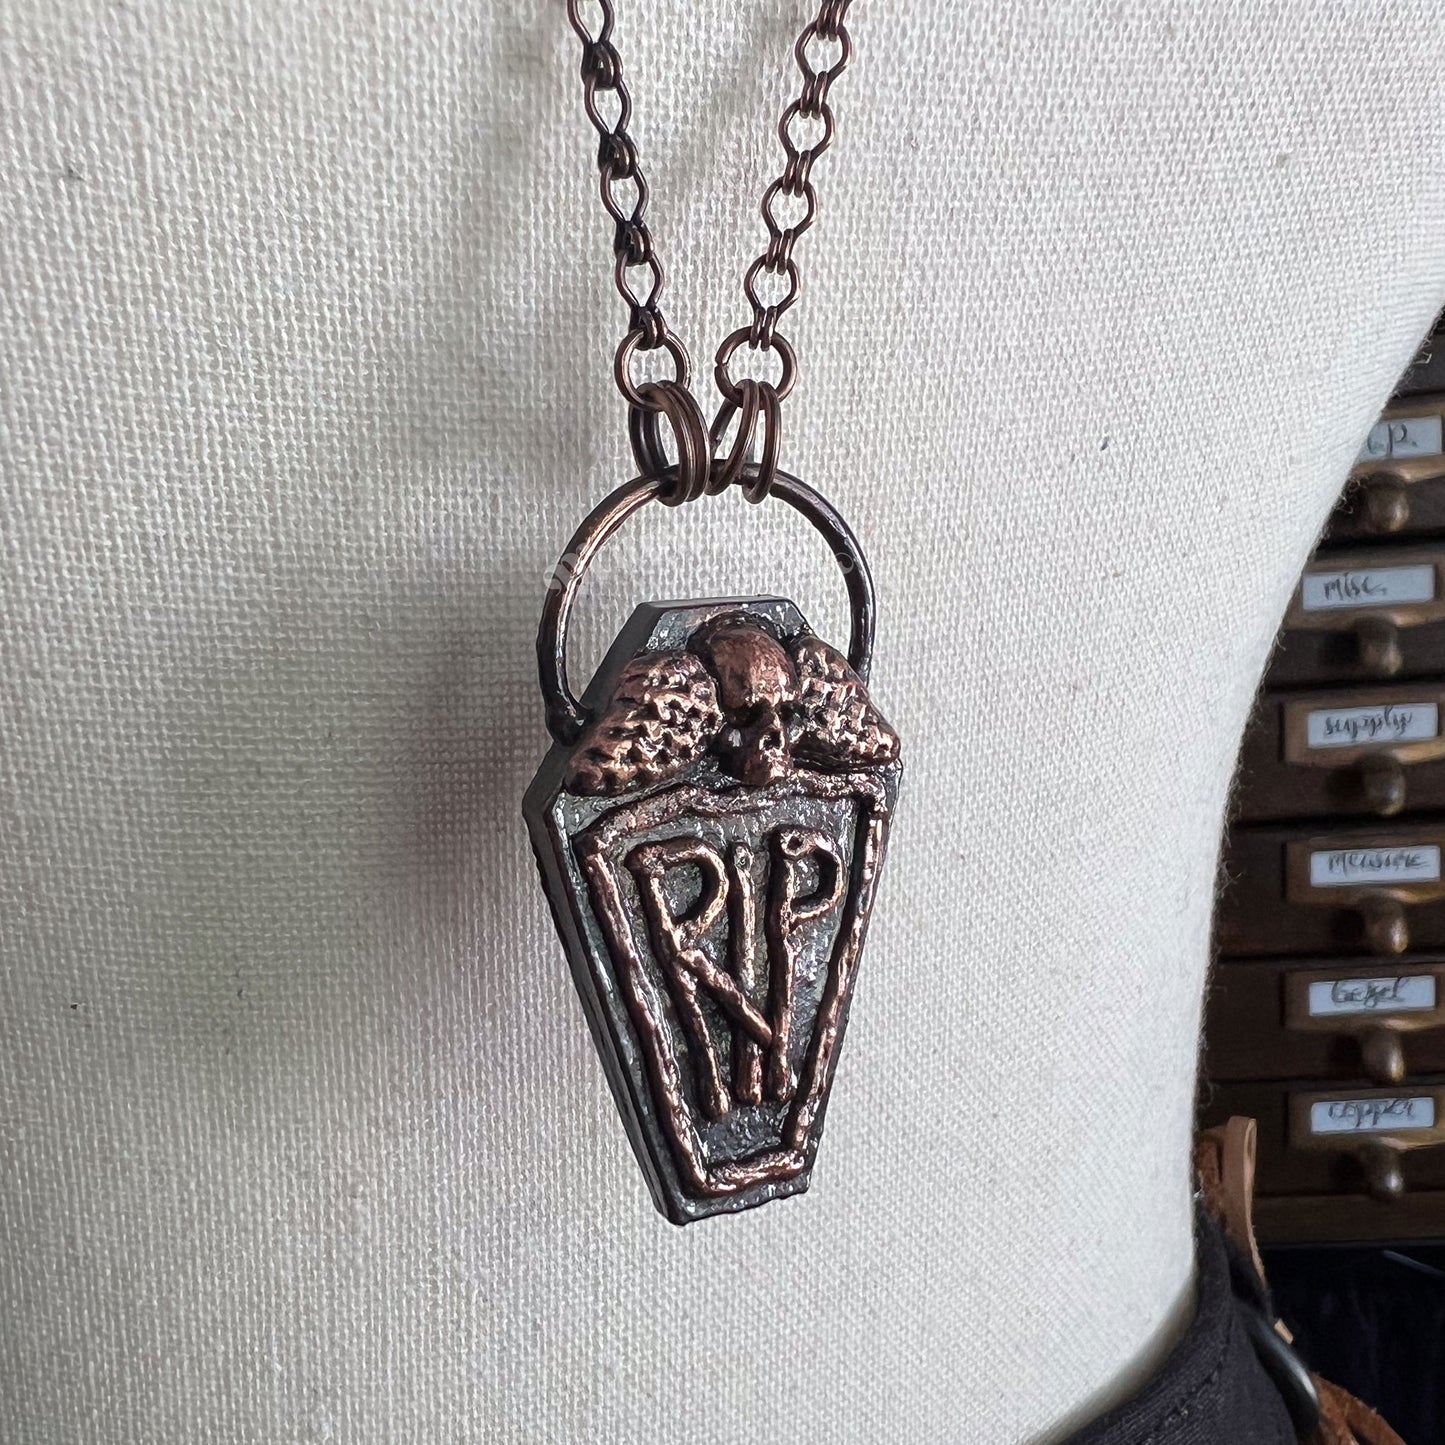 RIP Tombstone Necklace